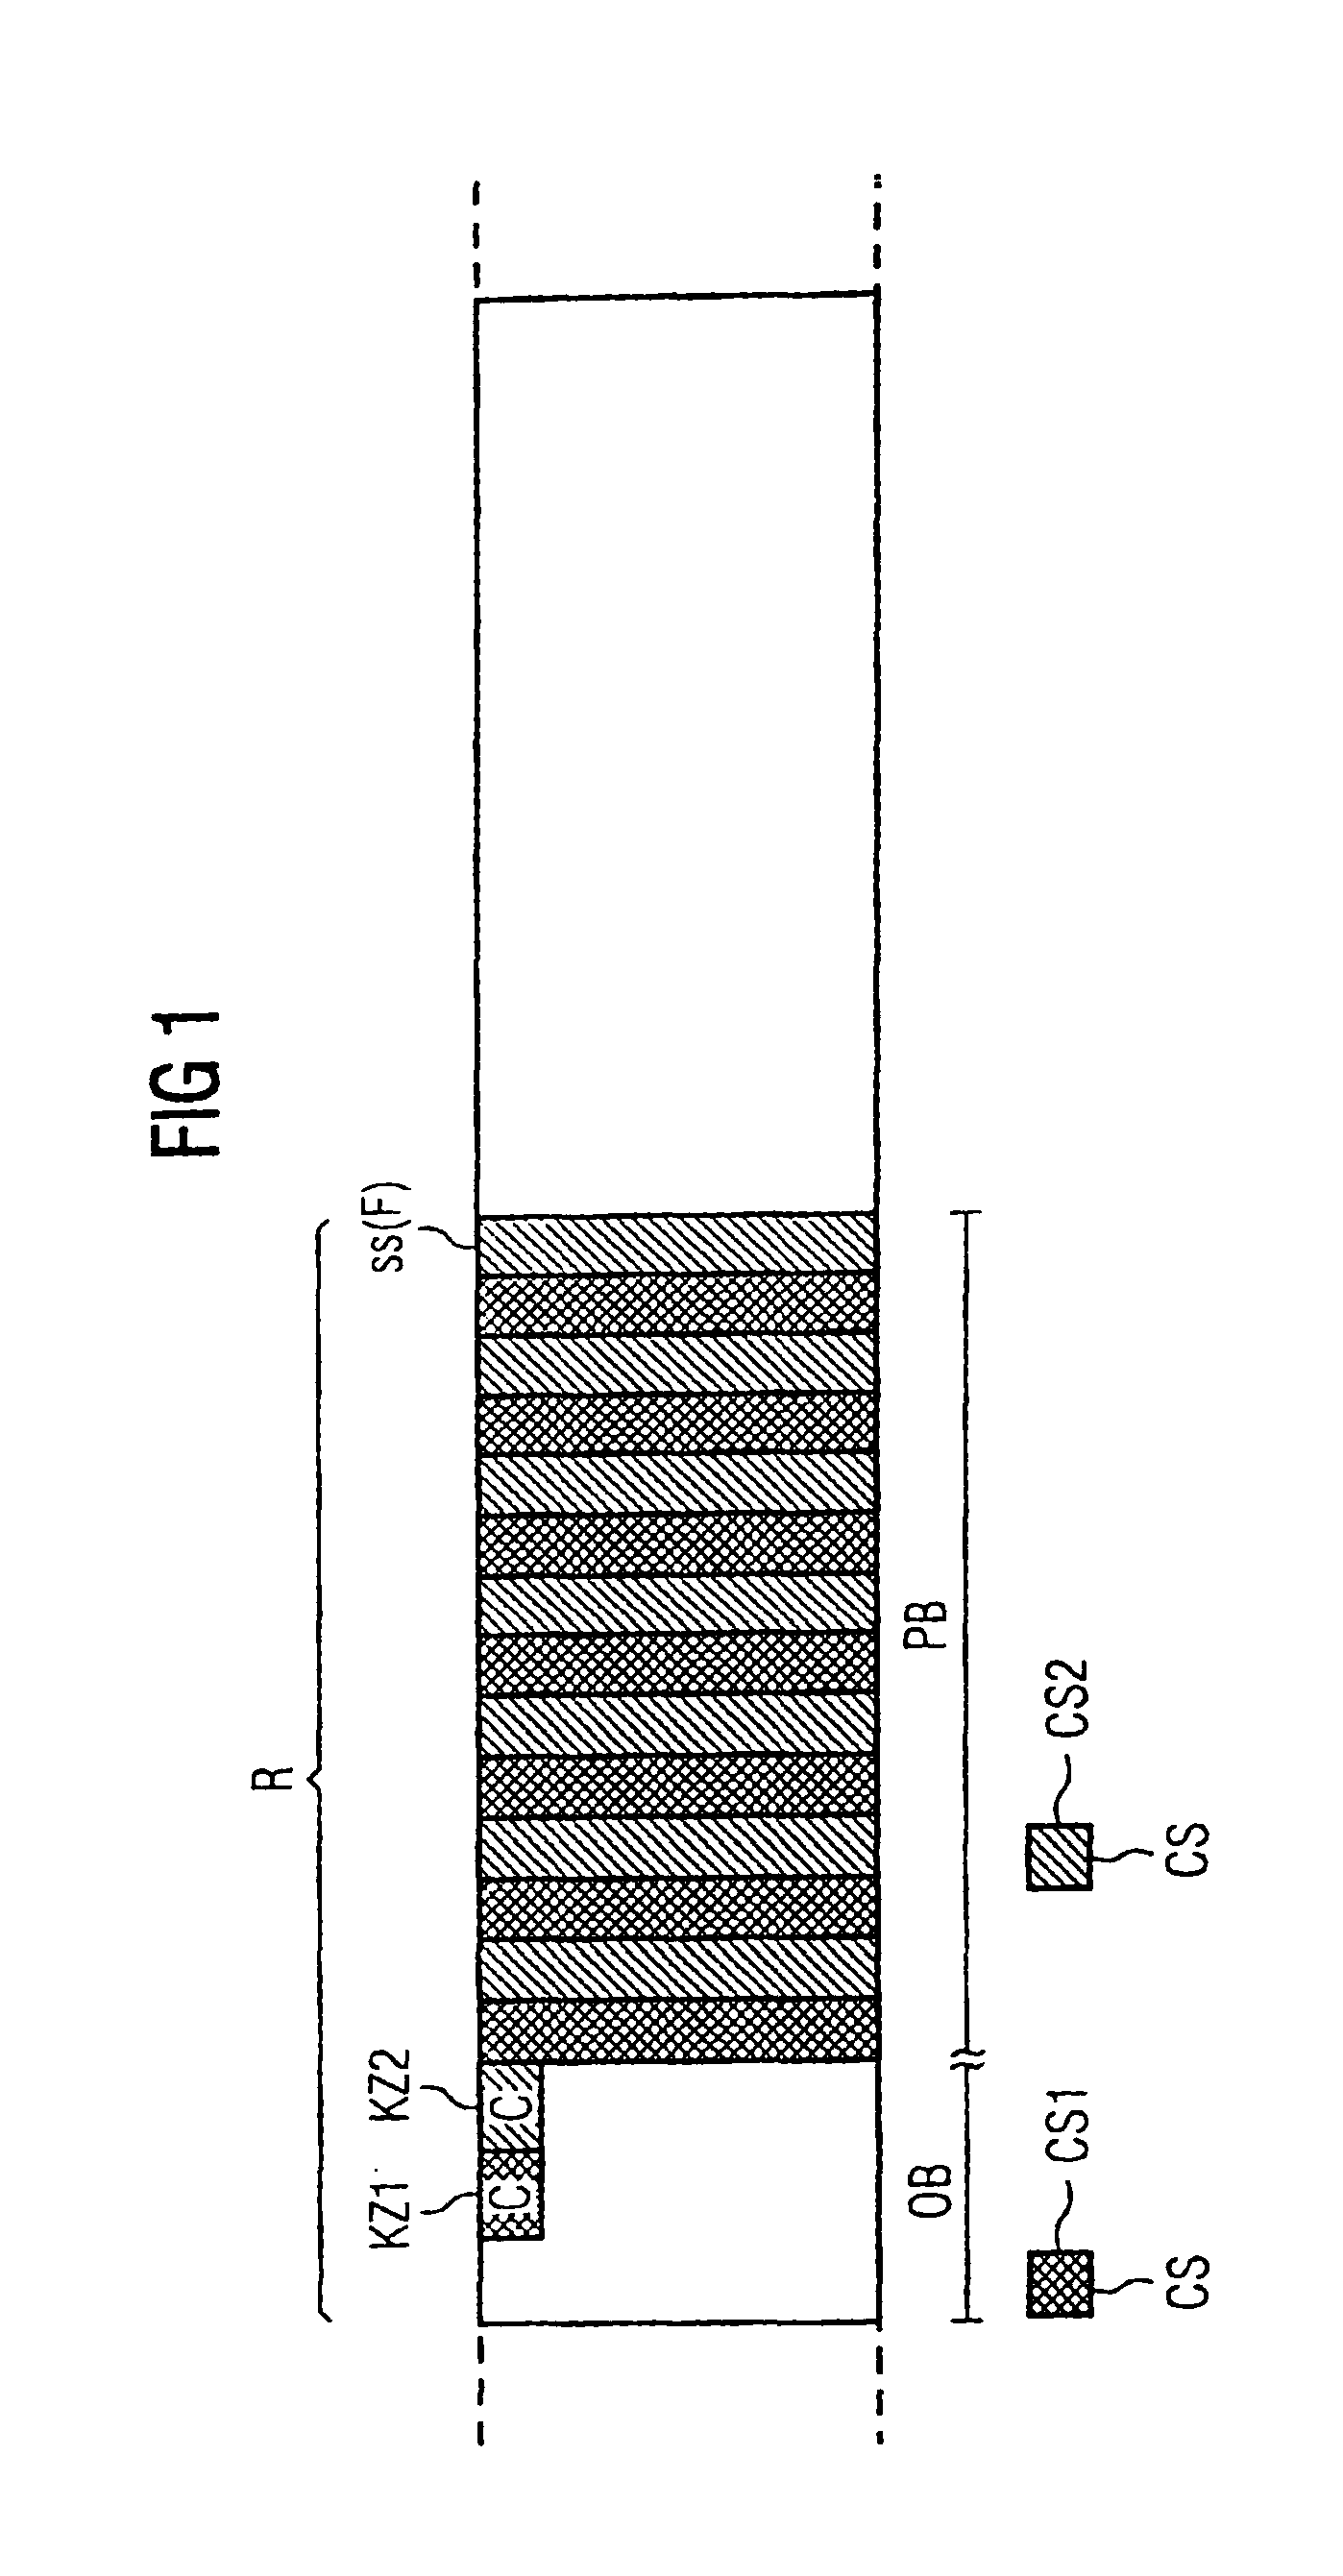 Method and system for transmitting at least one client signal within a server signal